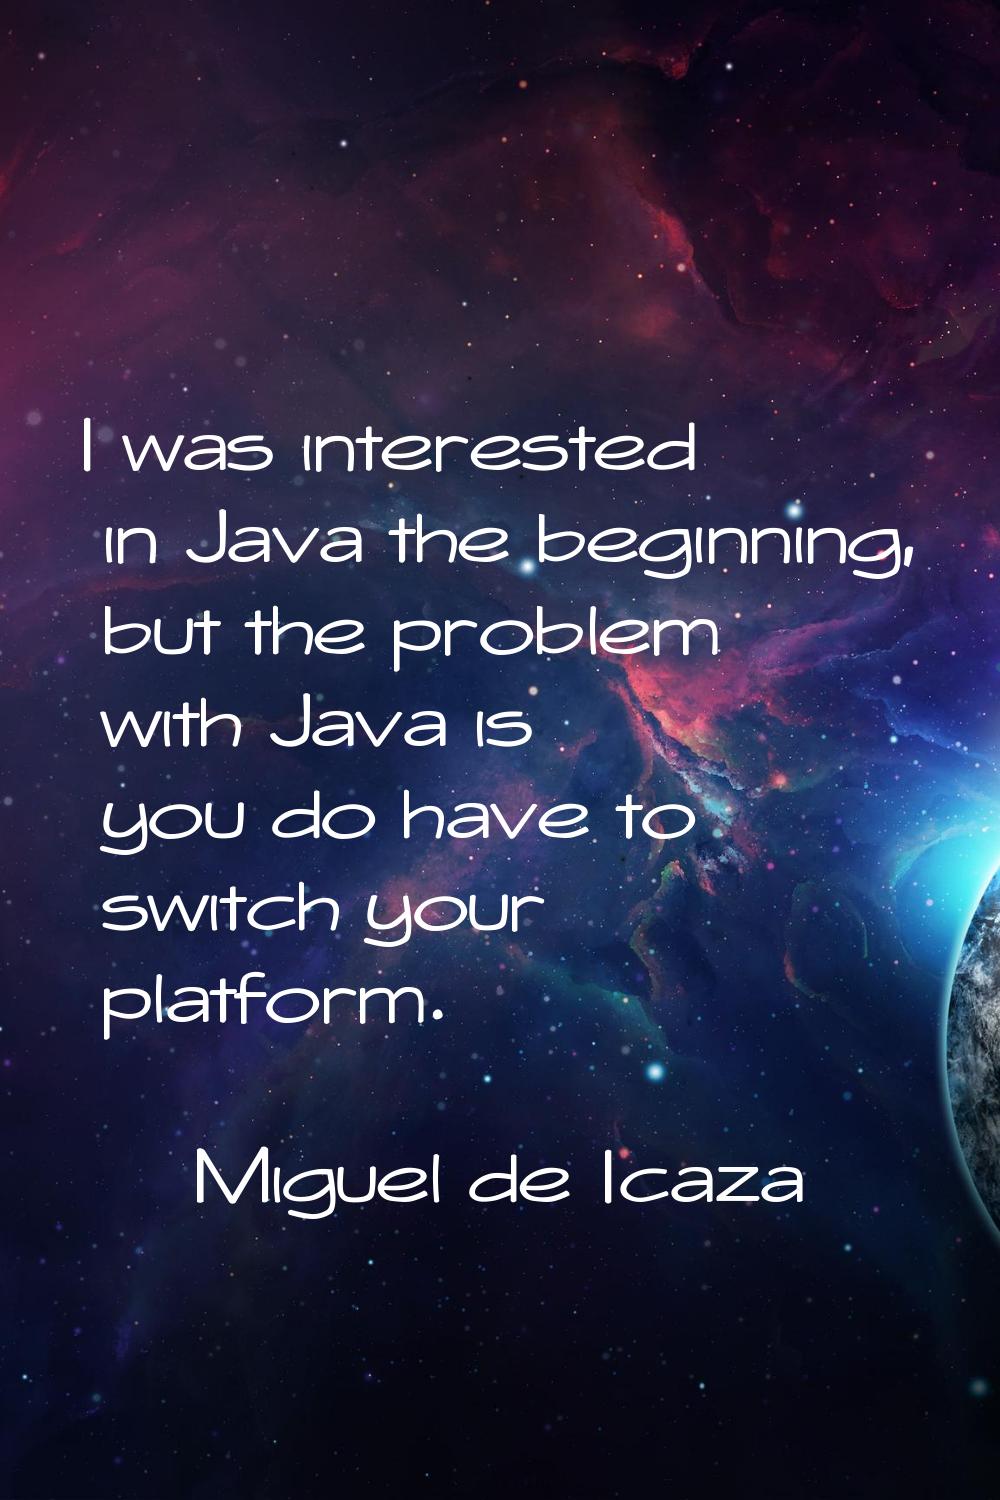 I was interested in Java the beginning, but the problem with Java is you do have to switch your pla